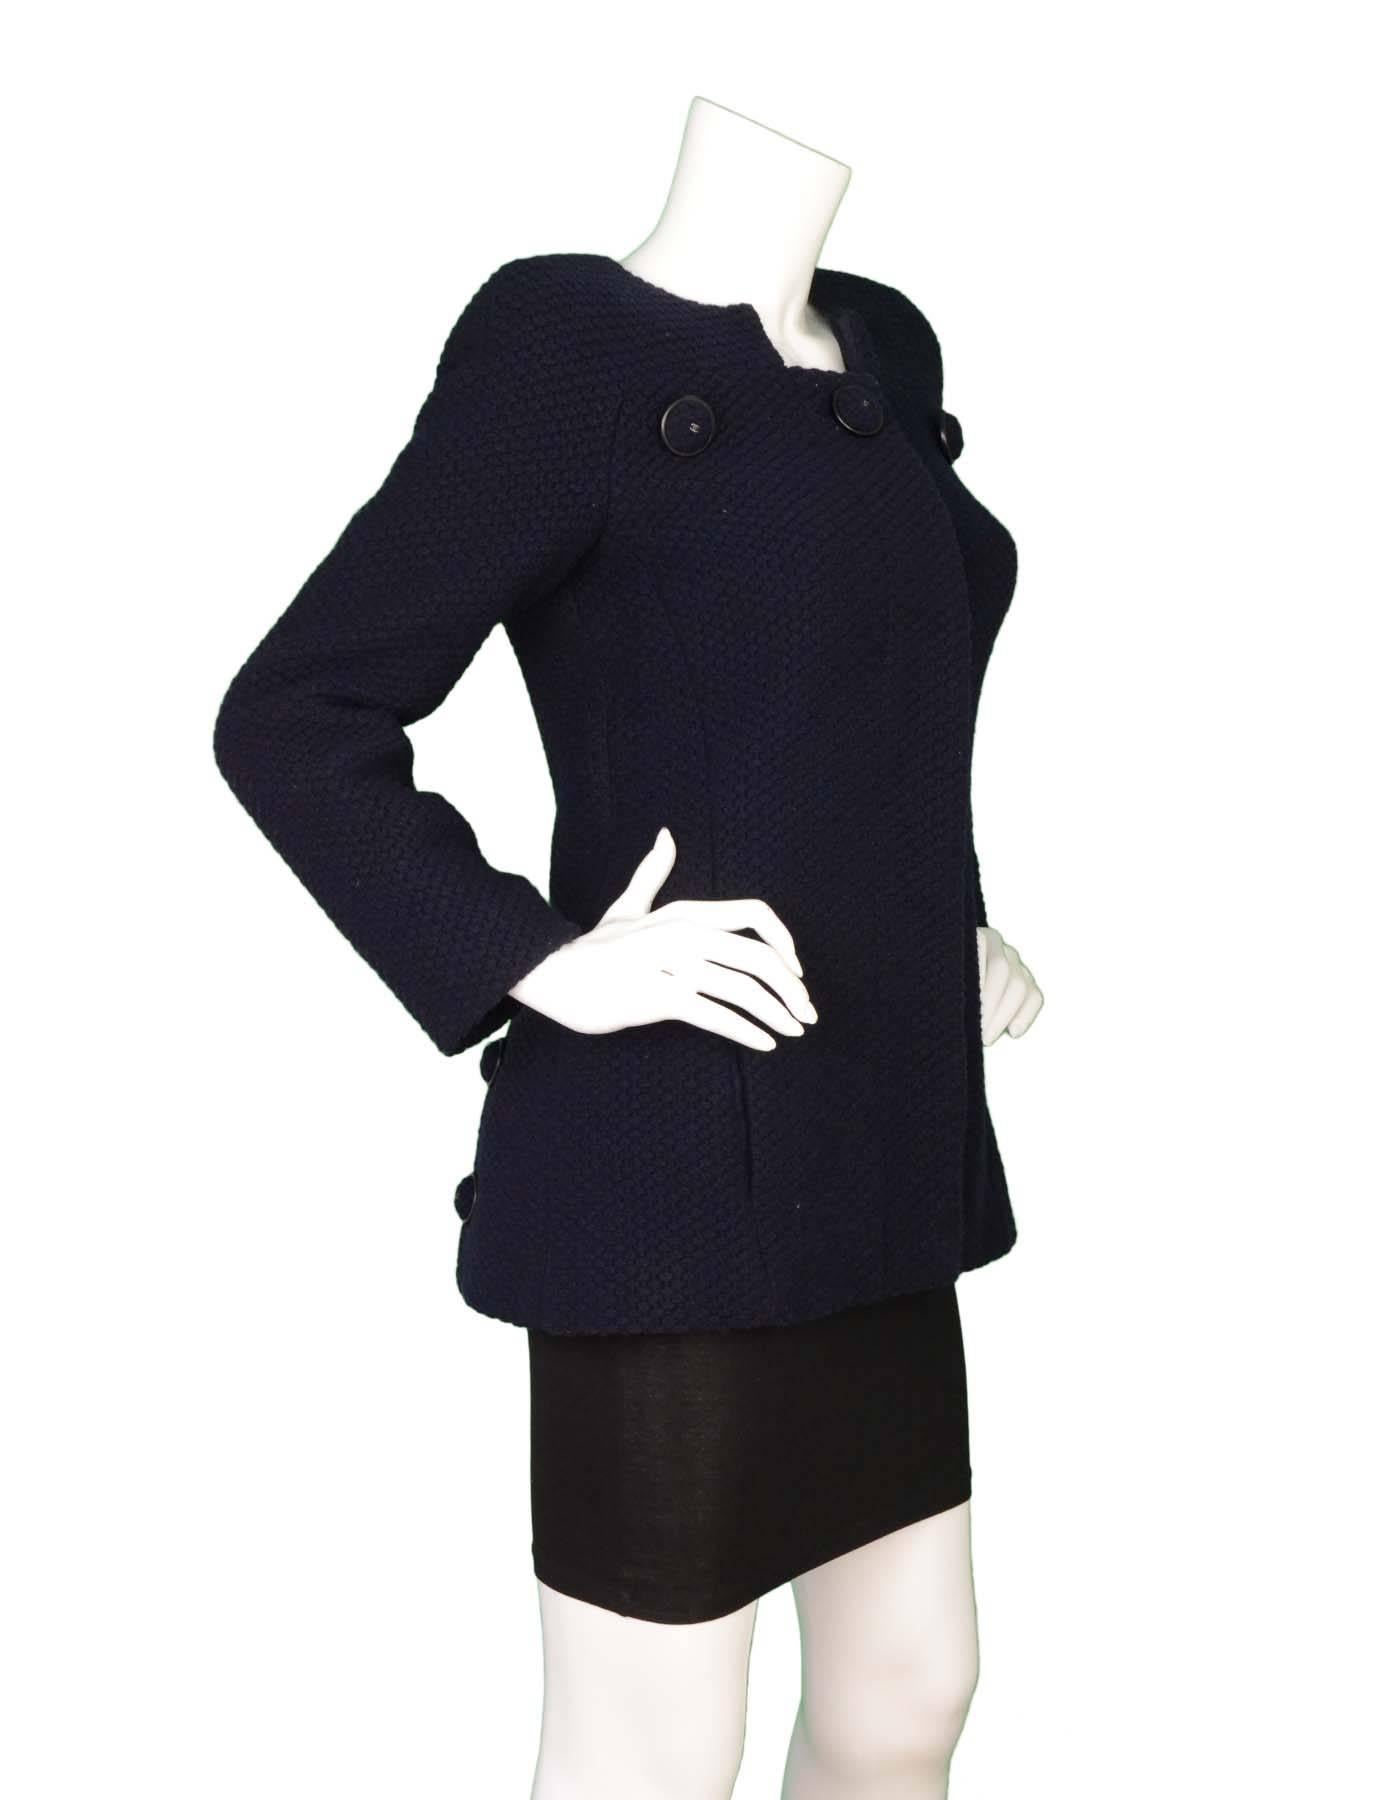 Chanel NEW Navy Wool Jacket  
Features three large navy wool covered bottons across neckline

Made In: France
Year of Production: 2015
Color: Navy
Composition: 80% wool, 20% nylon
Lining: Navy, 100% silk
Closure/Opening: Button down